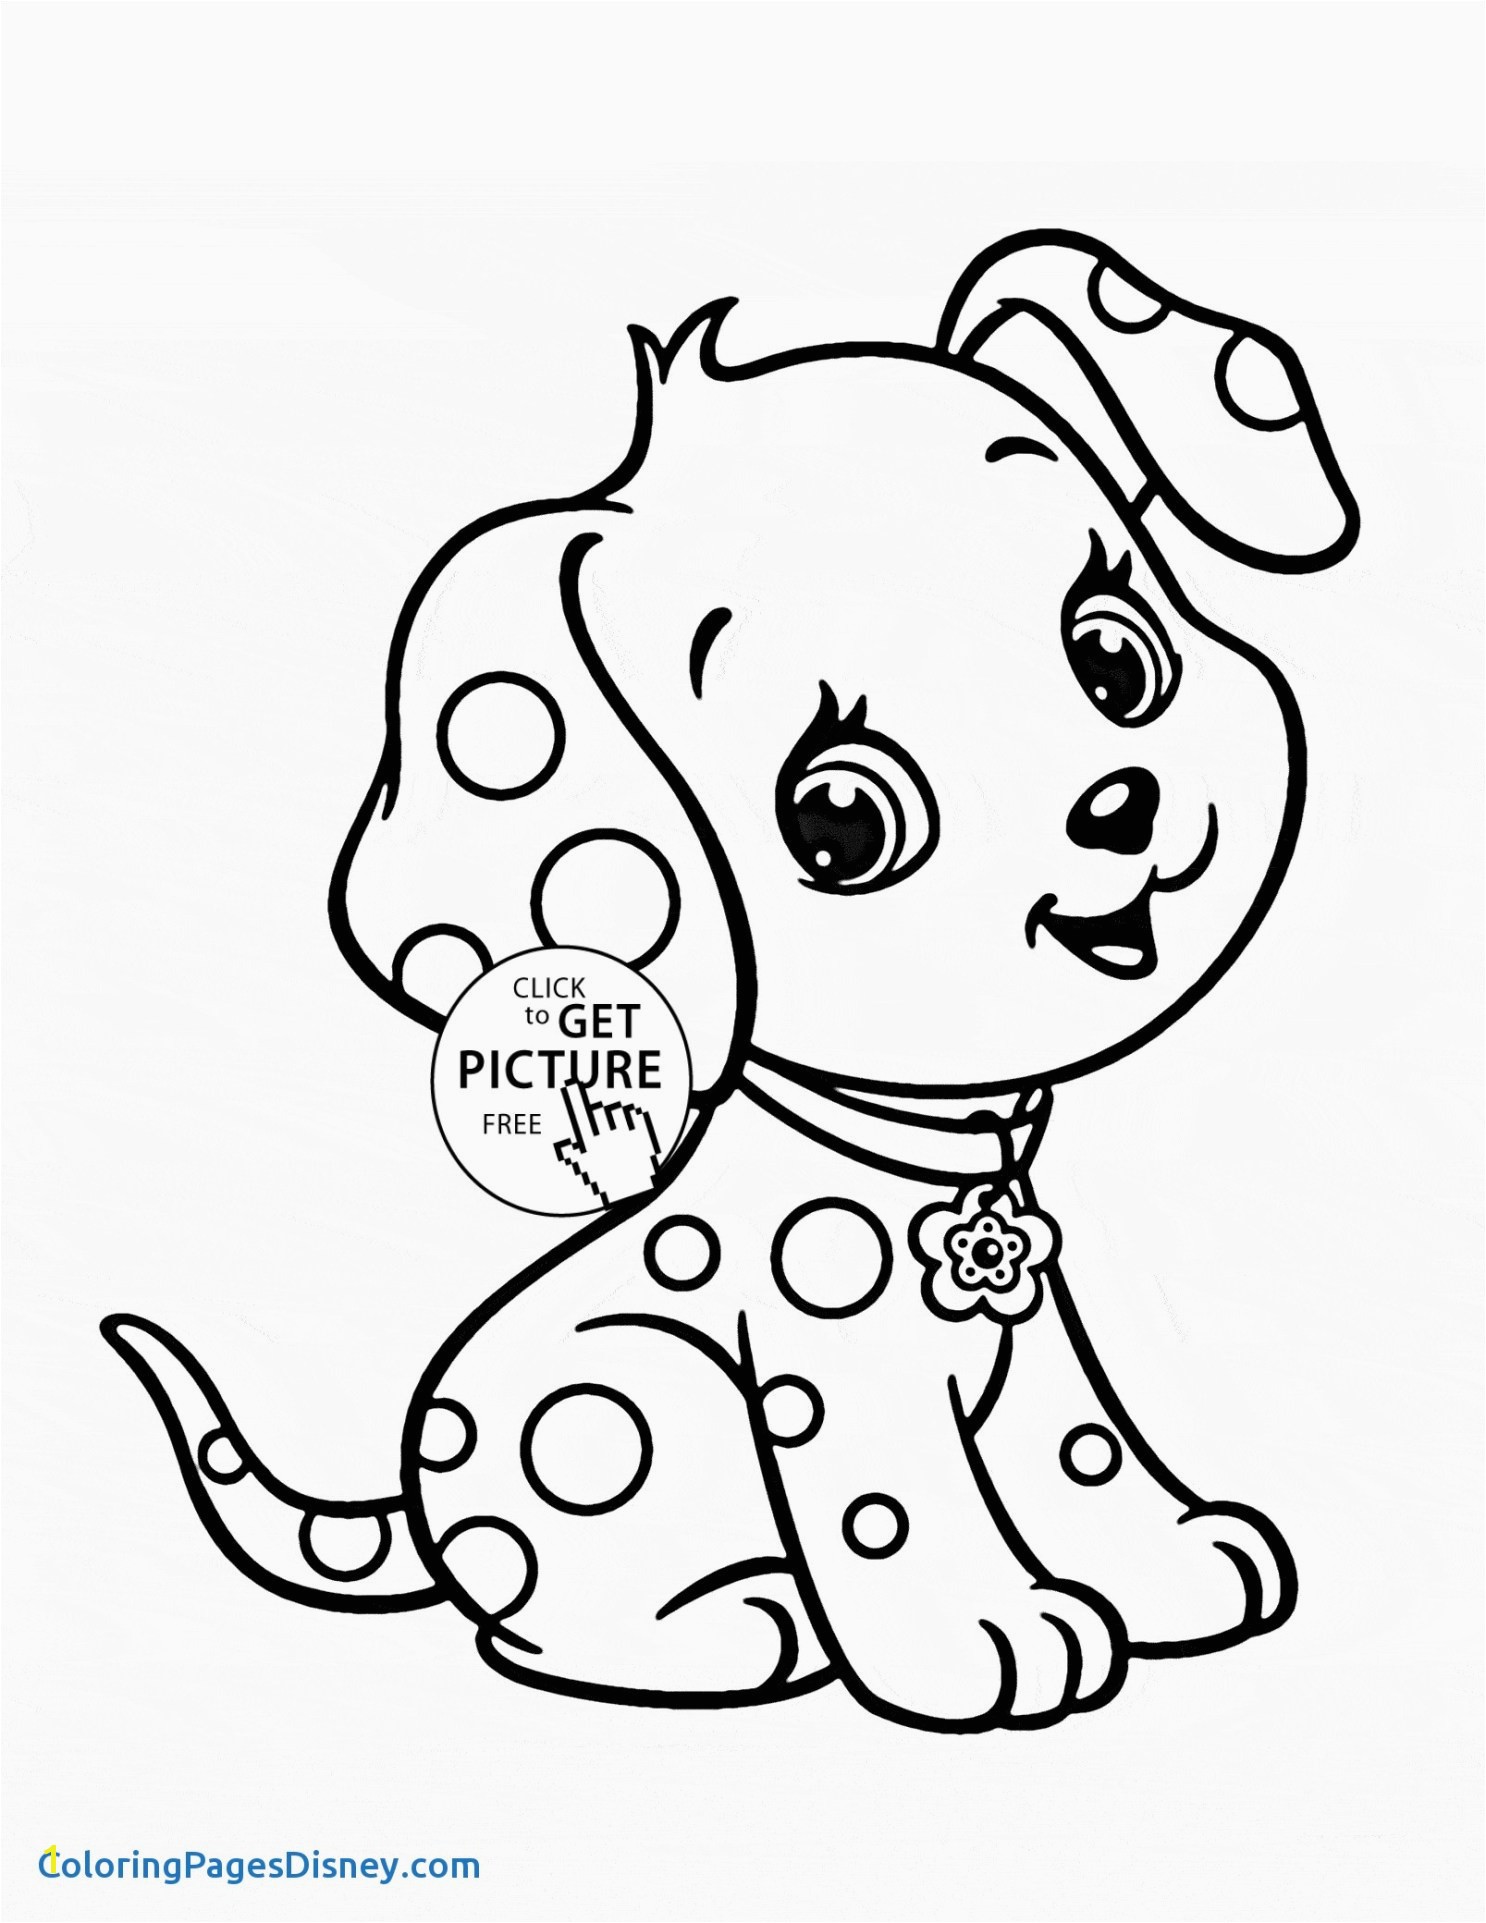 Disney Printable Coloring Pages Free Free Printable Disney Coloring Pages for Kids Printable Coloring